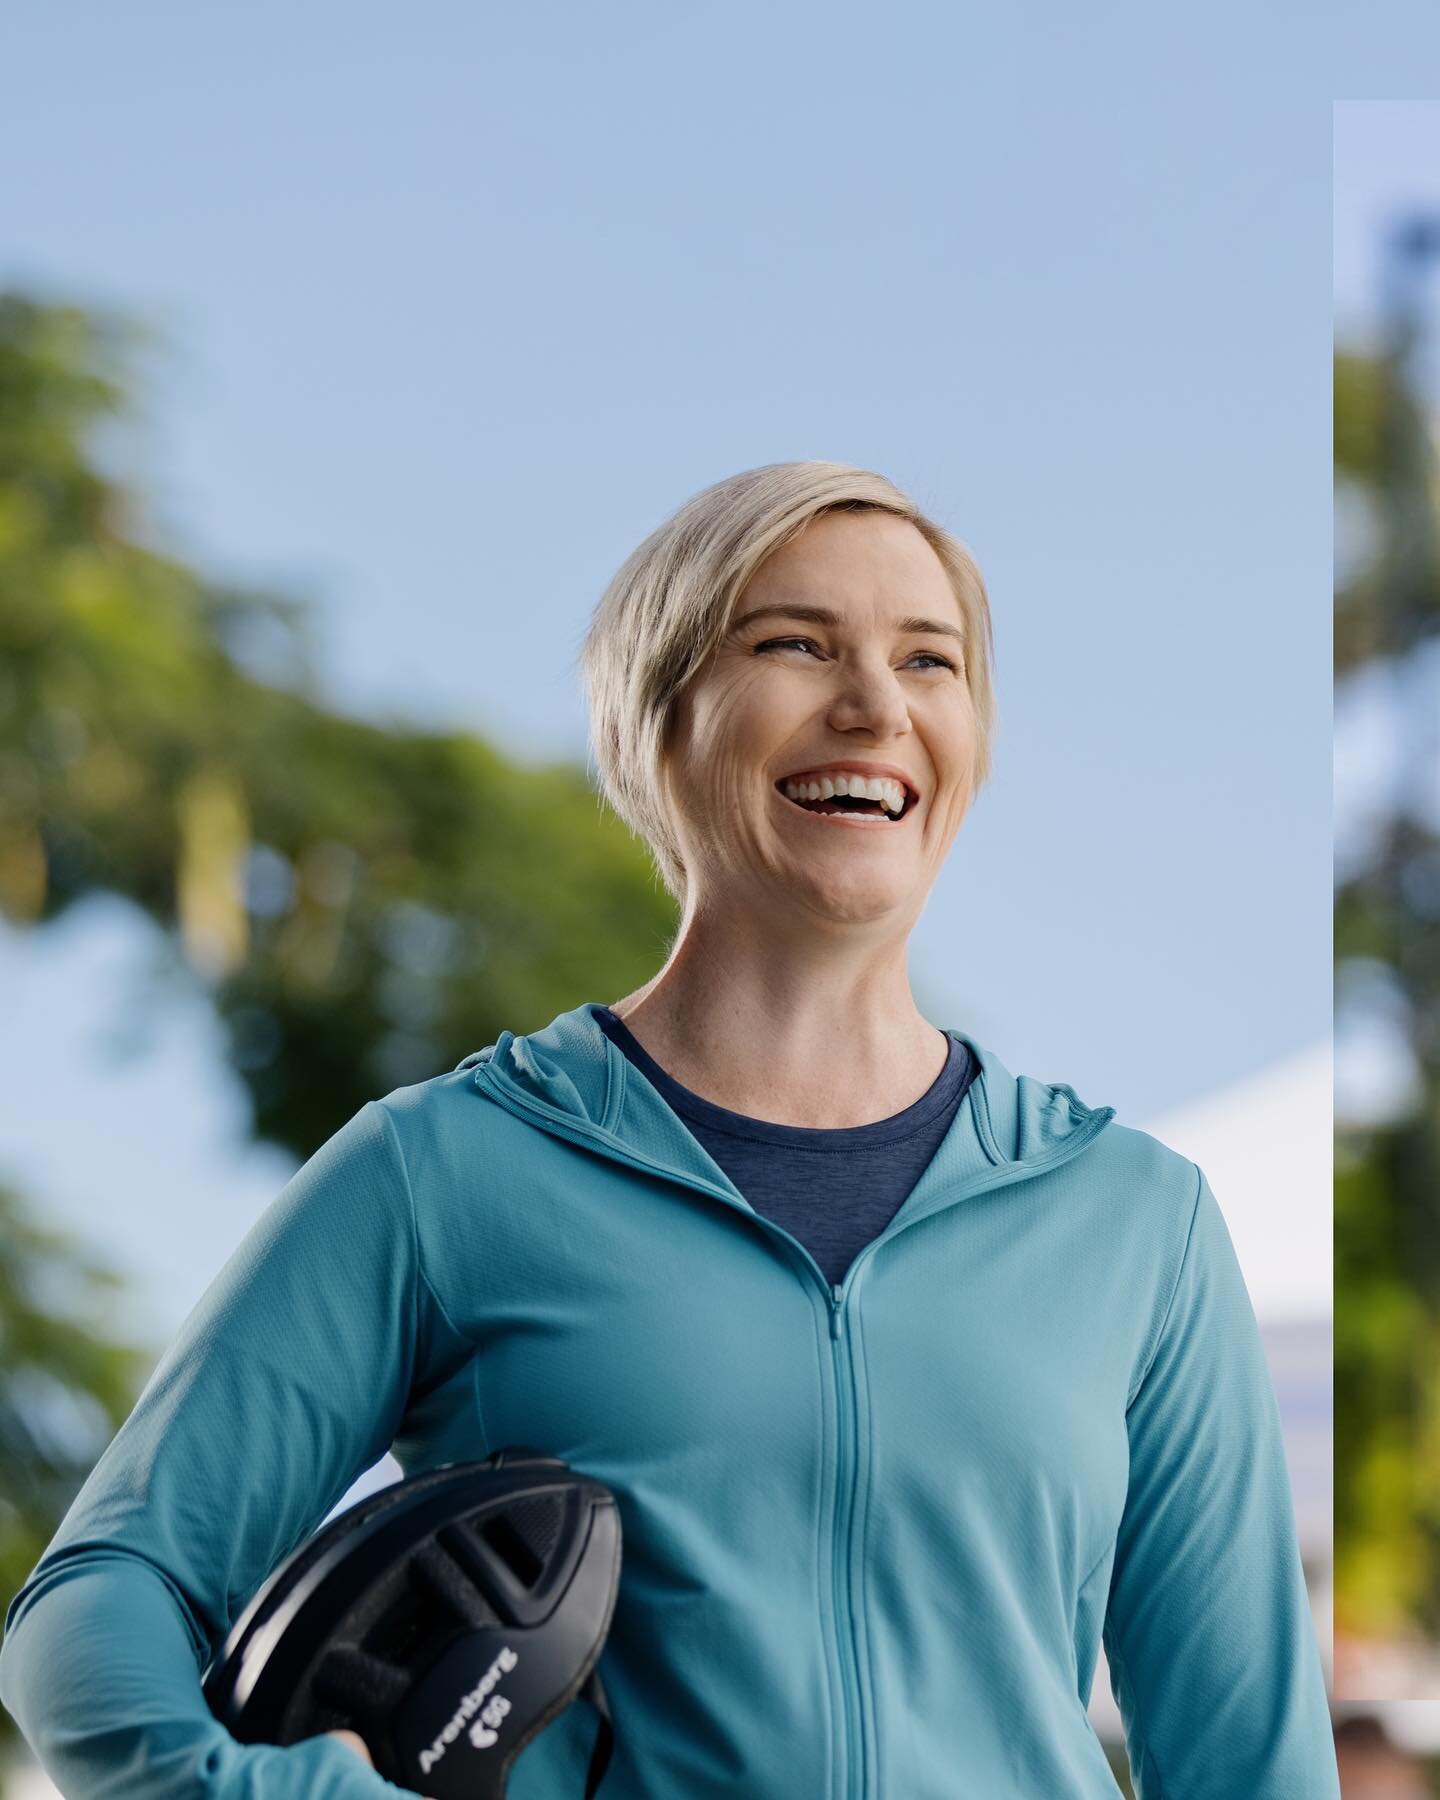 Anna Meares photographed for Telstra